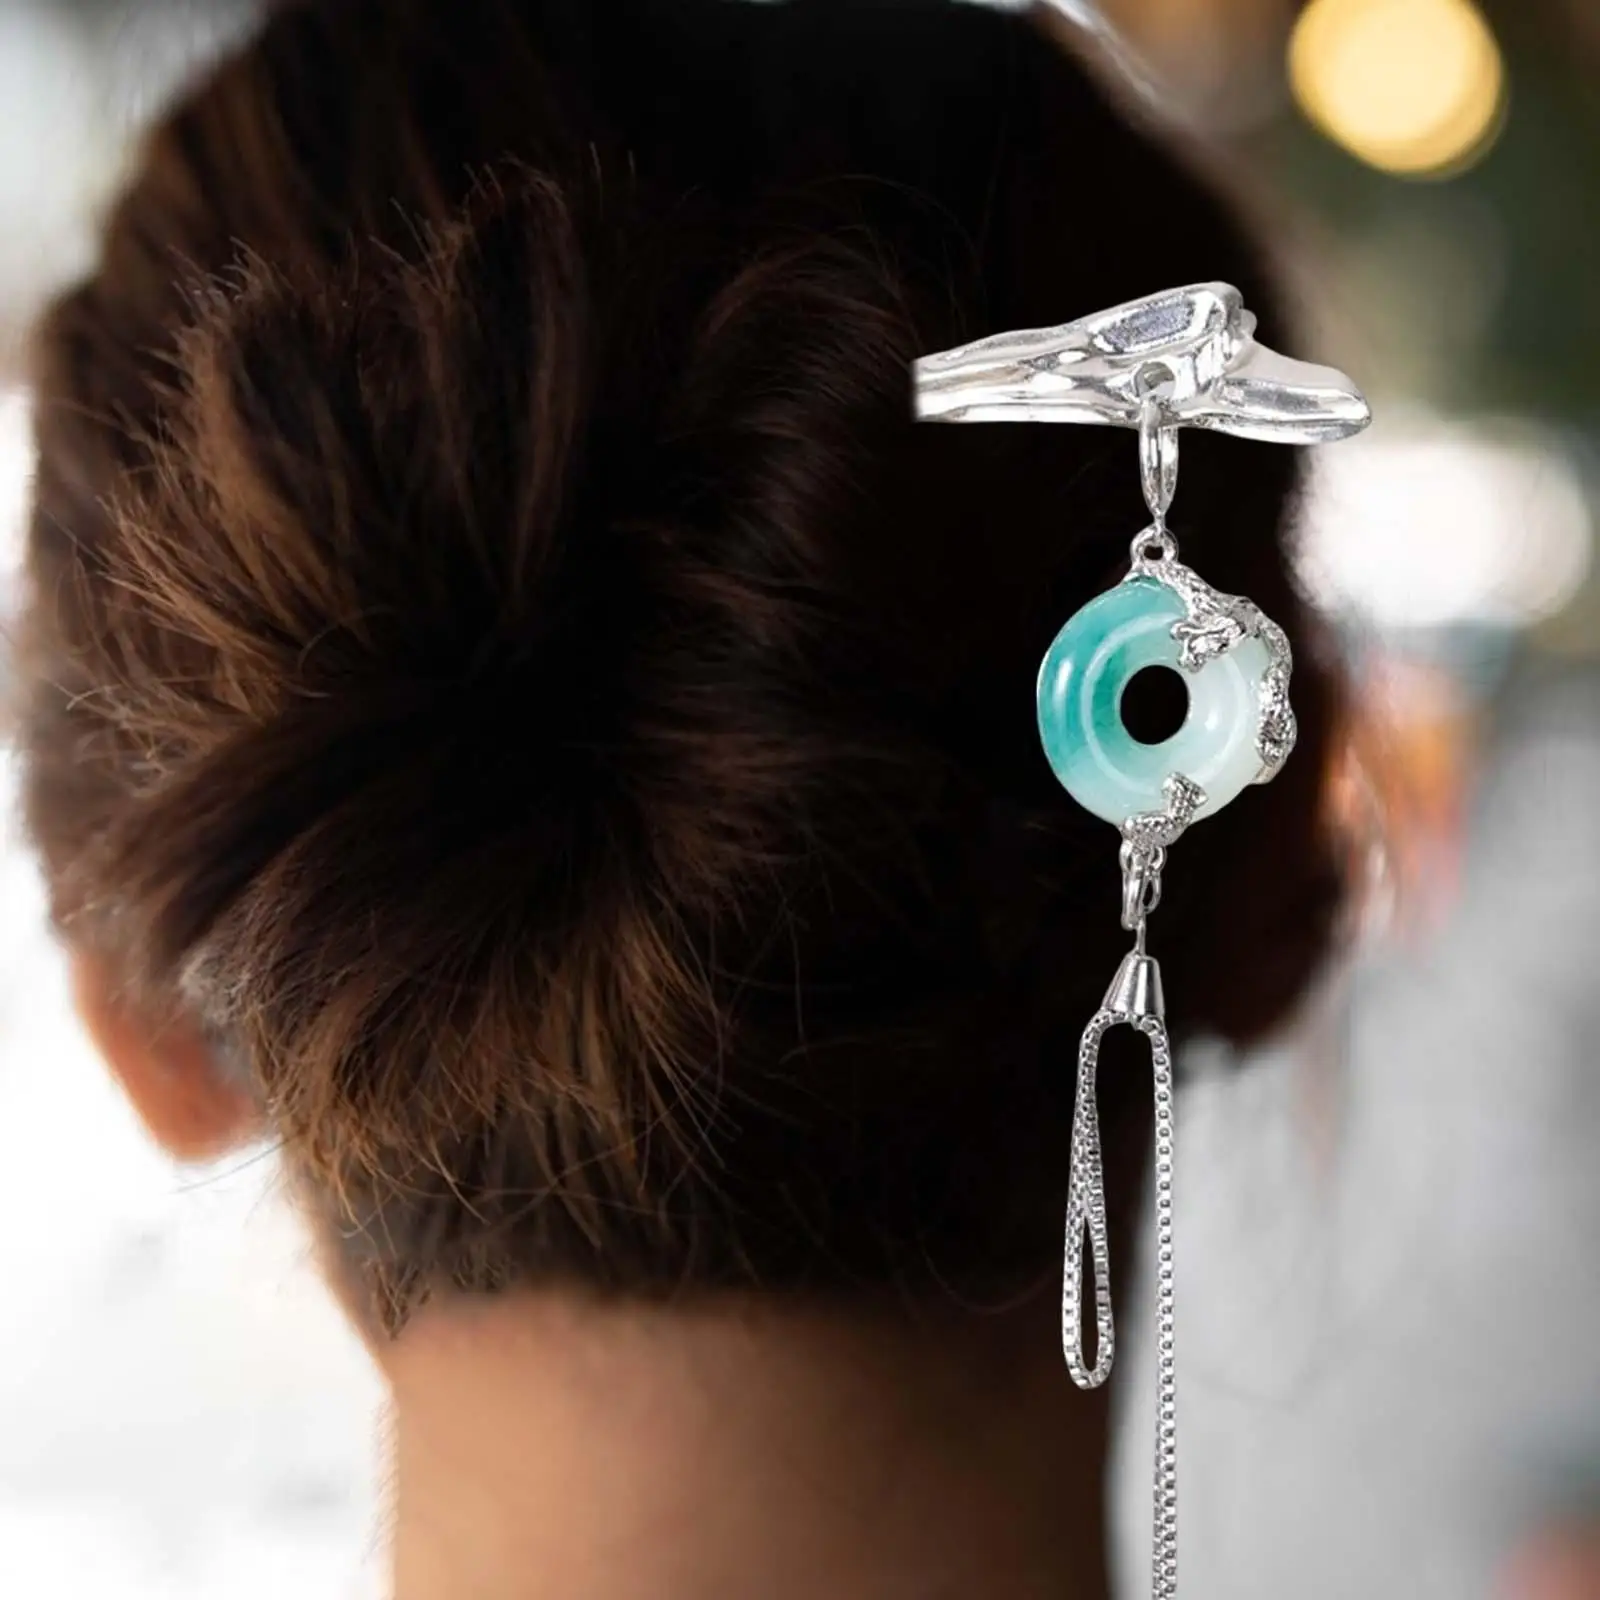 Chinese Hairpins with Tassel Metal Hair Accessories for Women Girls Bridal Long Curly Hair